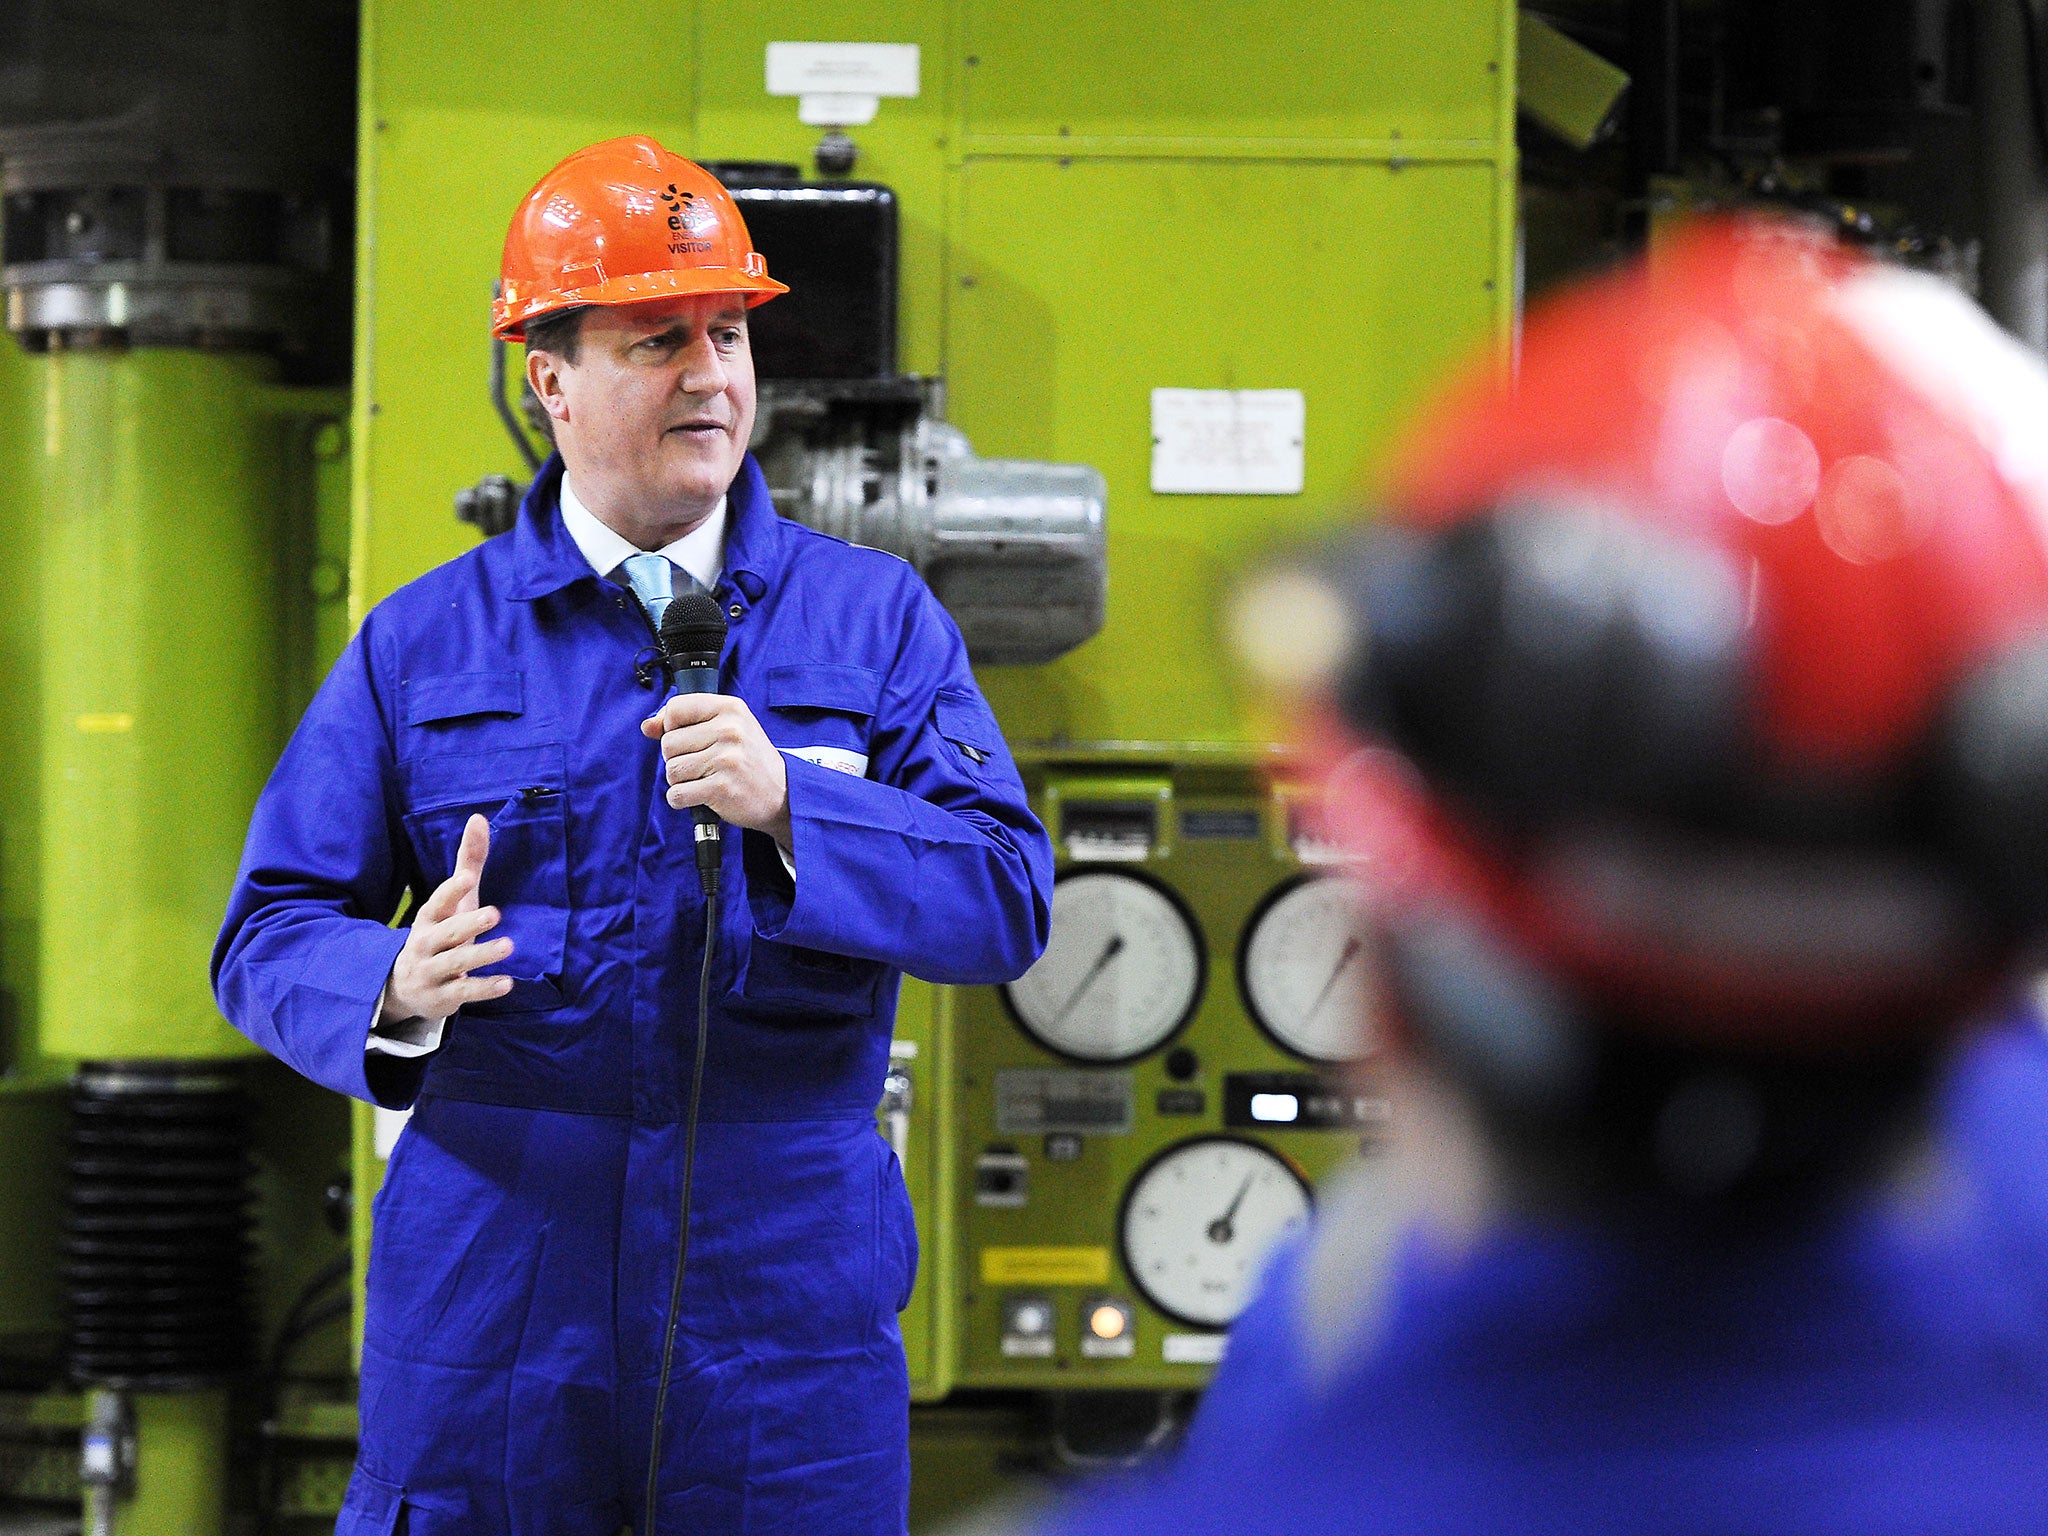 David Cameron delivering a speech to workers in the Charge Hall at Hinkley Point B in 2013. The Prime Minister is relying on Hinkley Point C as part of his strategy to 'keep the lights on' in Britain in the next decade